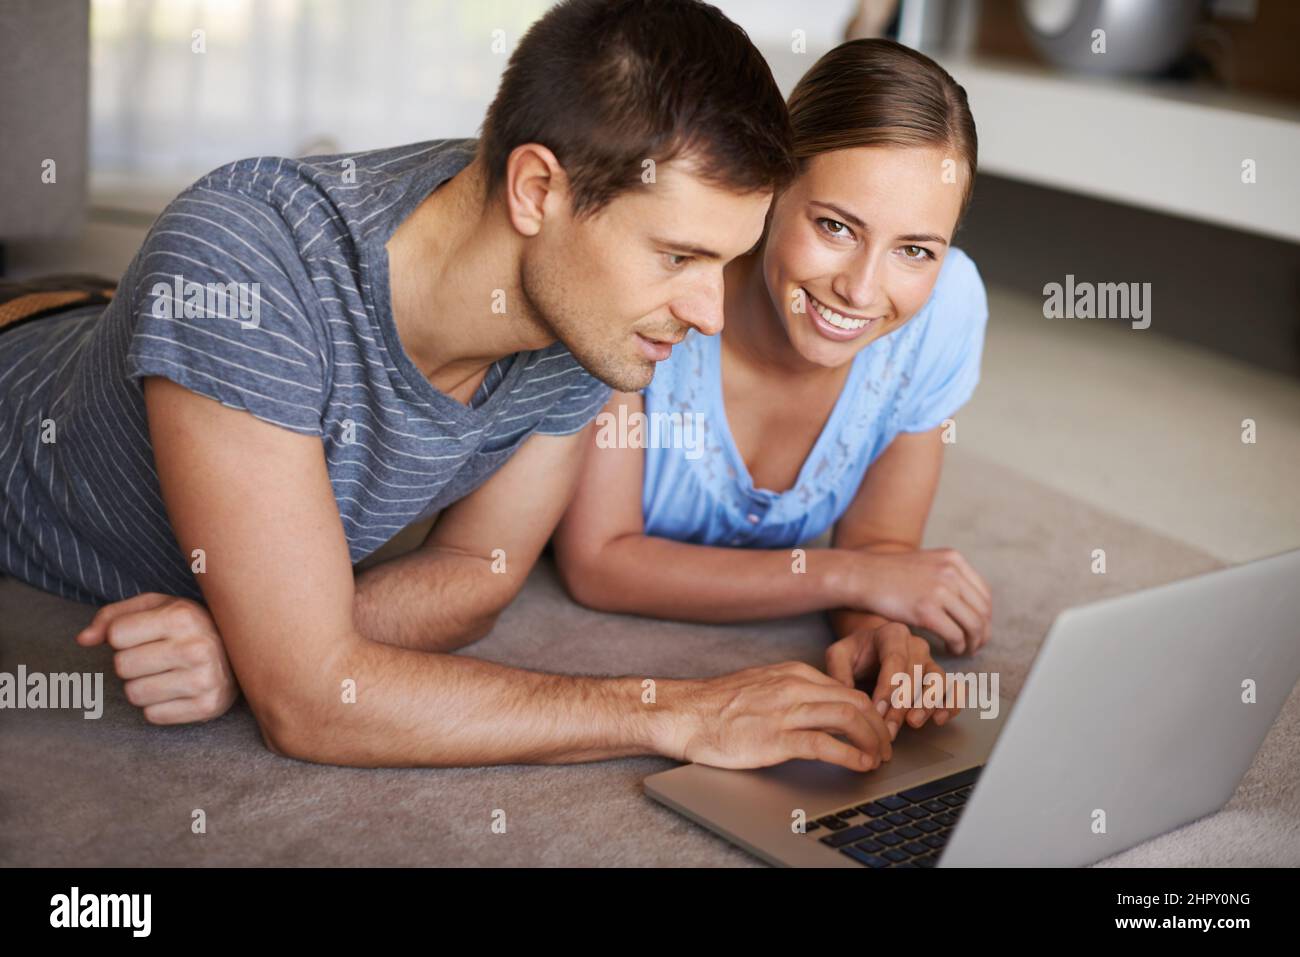 Getting all their info online. Shot of a happy young couple using a laptop on the floor together. Stock Photo